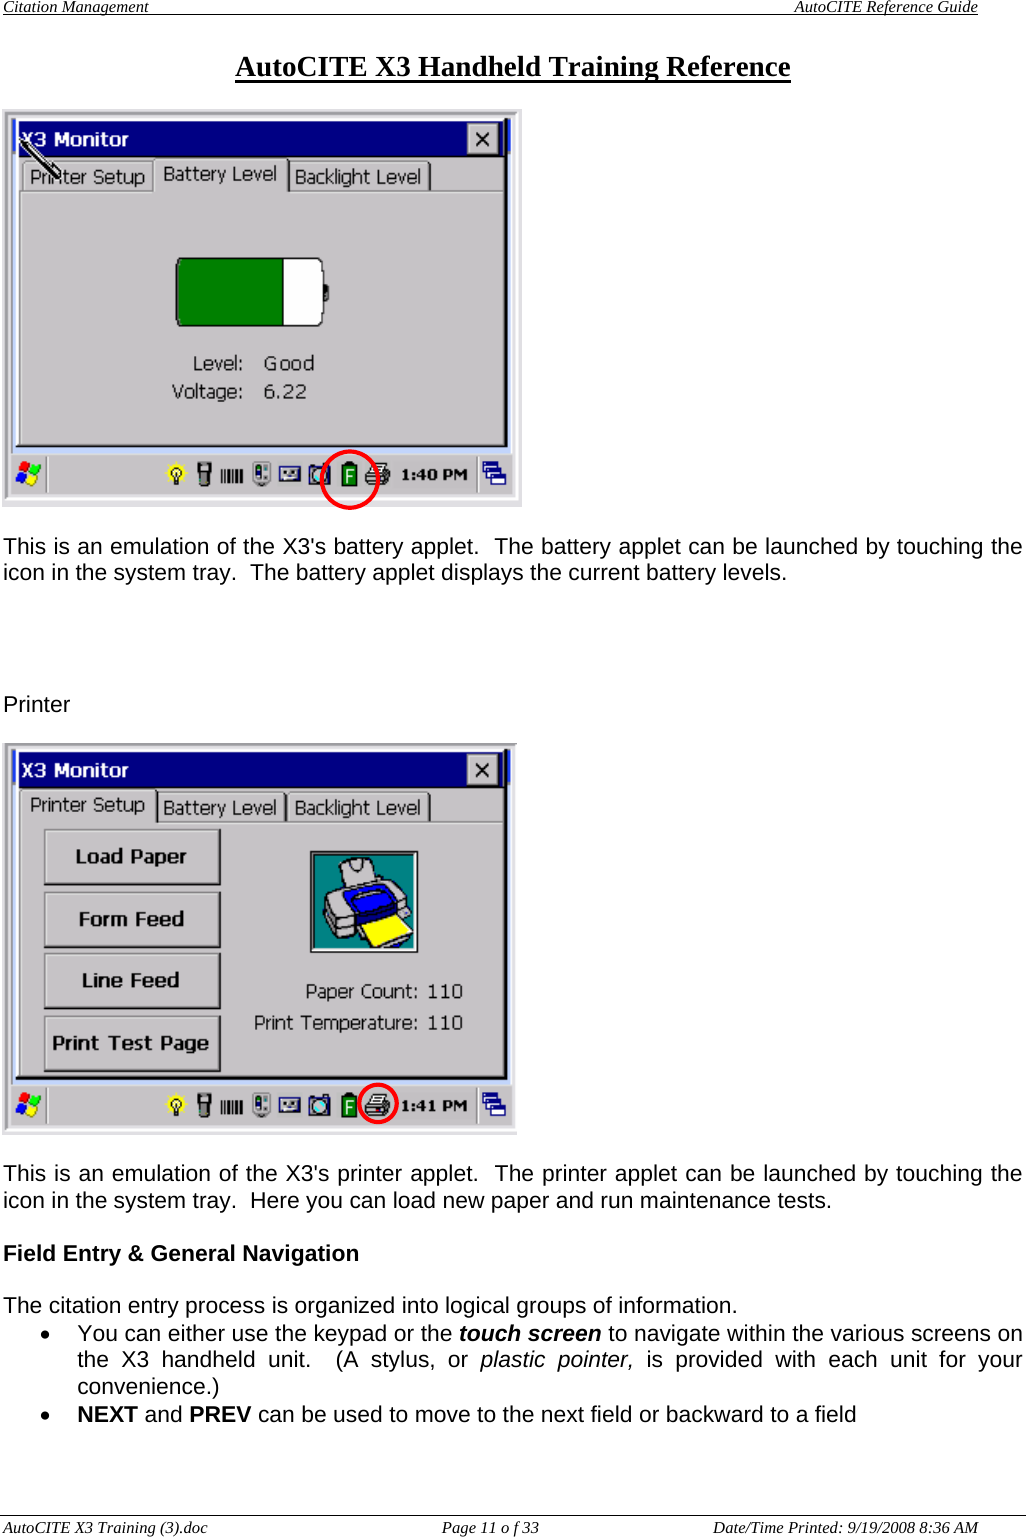 Citation Management    AutoCITE Reference Guide  AutoCITE X3 Handheld Training Reference AutoCITE X3 Training (3).doc  Page 11 o f 33  Date/Time Printed: 9/19/2008 8:36 AM  This is an emulation of the X3&apos;s battery applet.  The battery applet can be launched by touching the icon in the system tray.  The battery applet displays the current battery levels.     Printer    This is an emulation of the X3&apos;s printer applet.  The printer applet can be launched by touching the icon in the system tray.  Here you can load new paper and run maintenance tests.  Field Entry &amp; General Navigation  The citation entry process is organized into logical groups of information.   •  You can either use the keypad or the touch screen to navigate within the various screens on the X3 handheld unit.  (A stylus, or plastic pointer, is provided with each unit for your convenience.) • NEXT and PREV can be used to move to the next field or backward to a field 